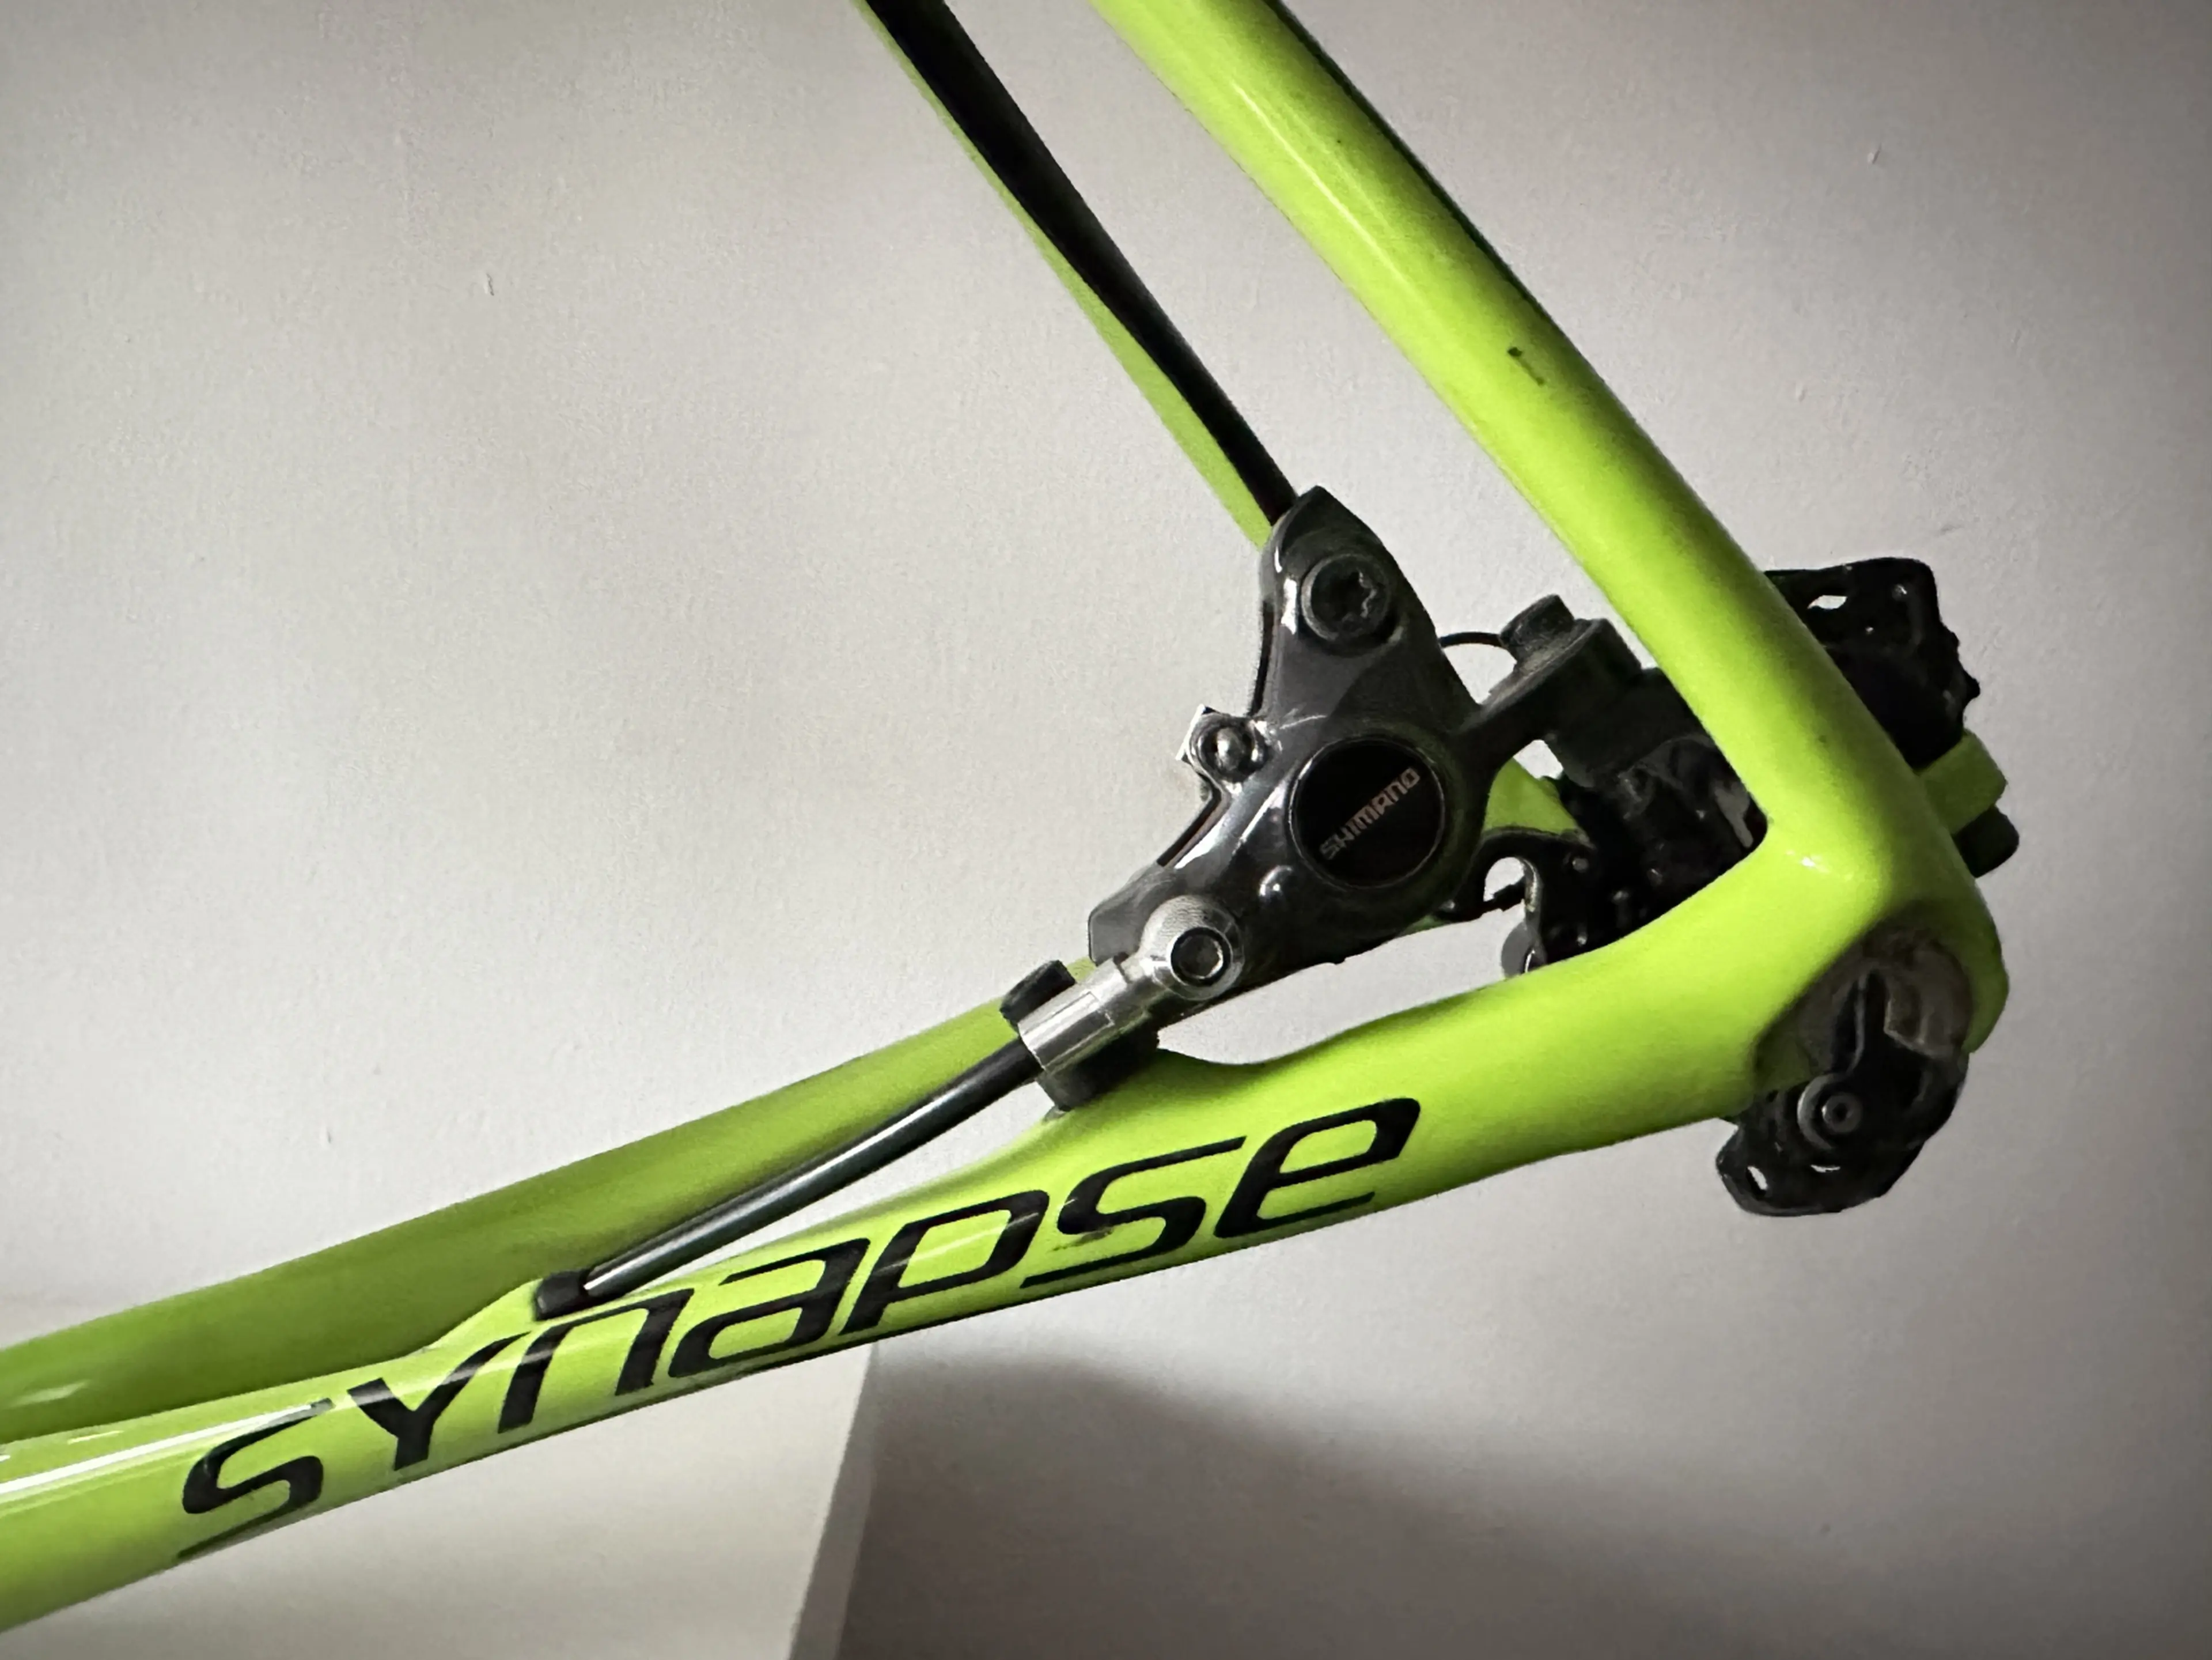 9. Cannondale Synapse Disc + Ultregra Di2 groupset